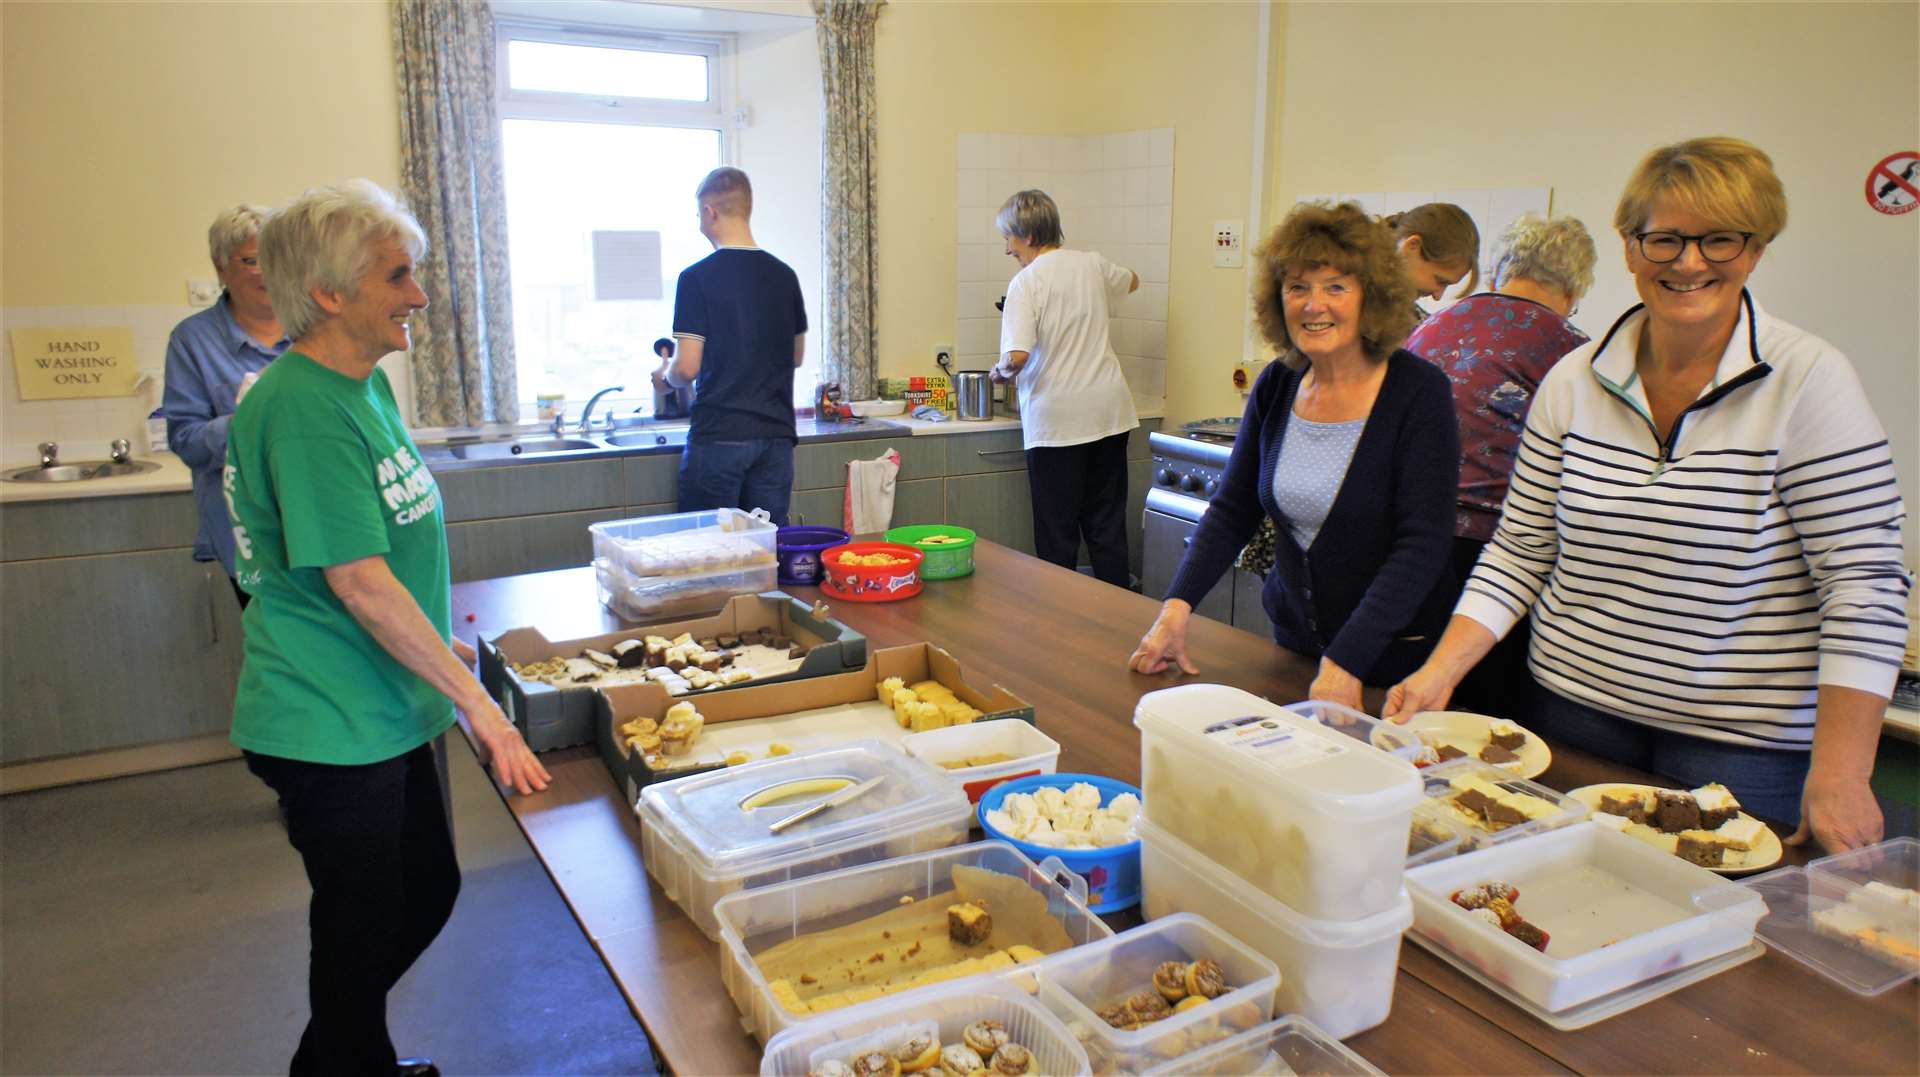 Busy in the kitchen at the Macmillan coffee morning event in Watten Village Hall. Picture: DGS